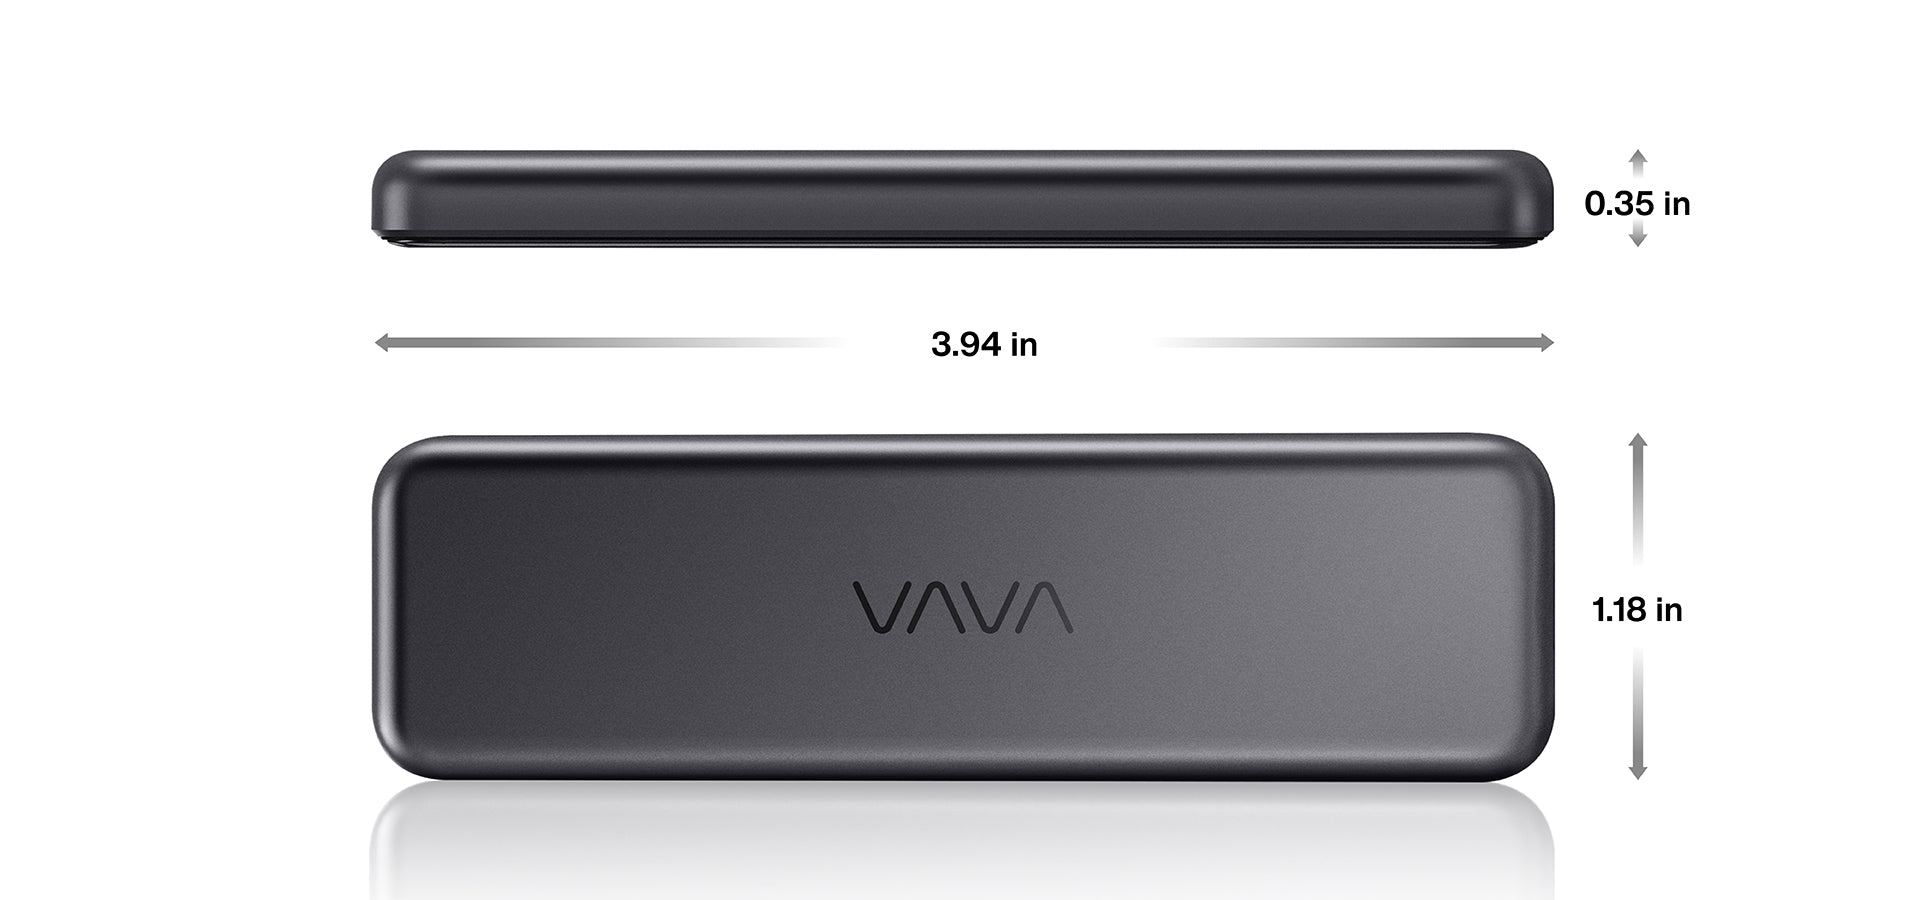 VAVA portable SSD hooked up to a PS4 next to a game controller